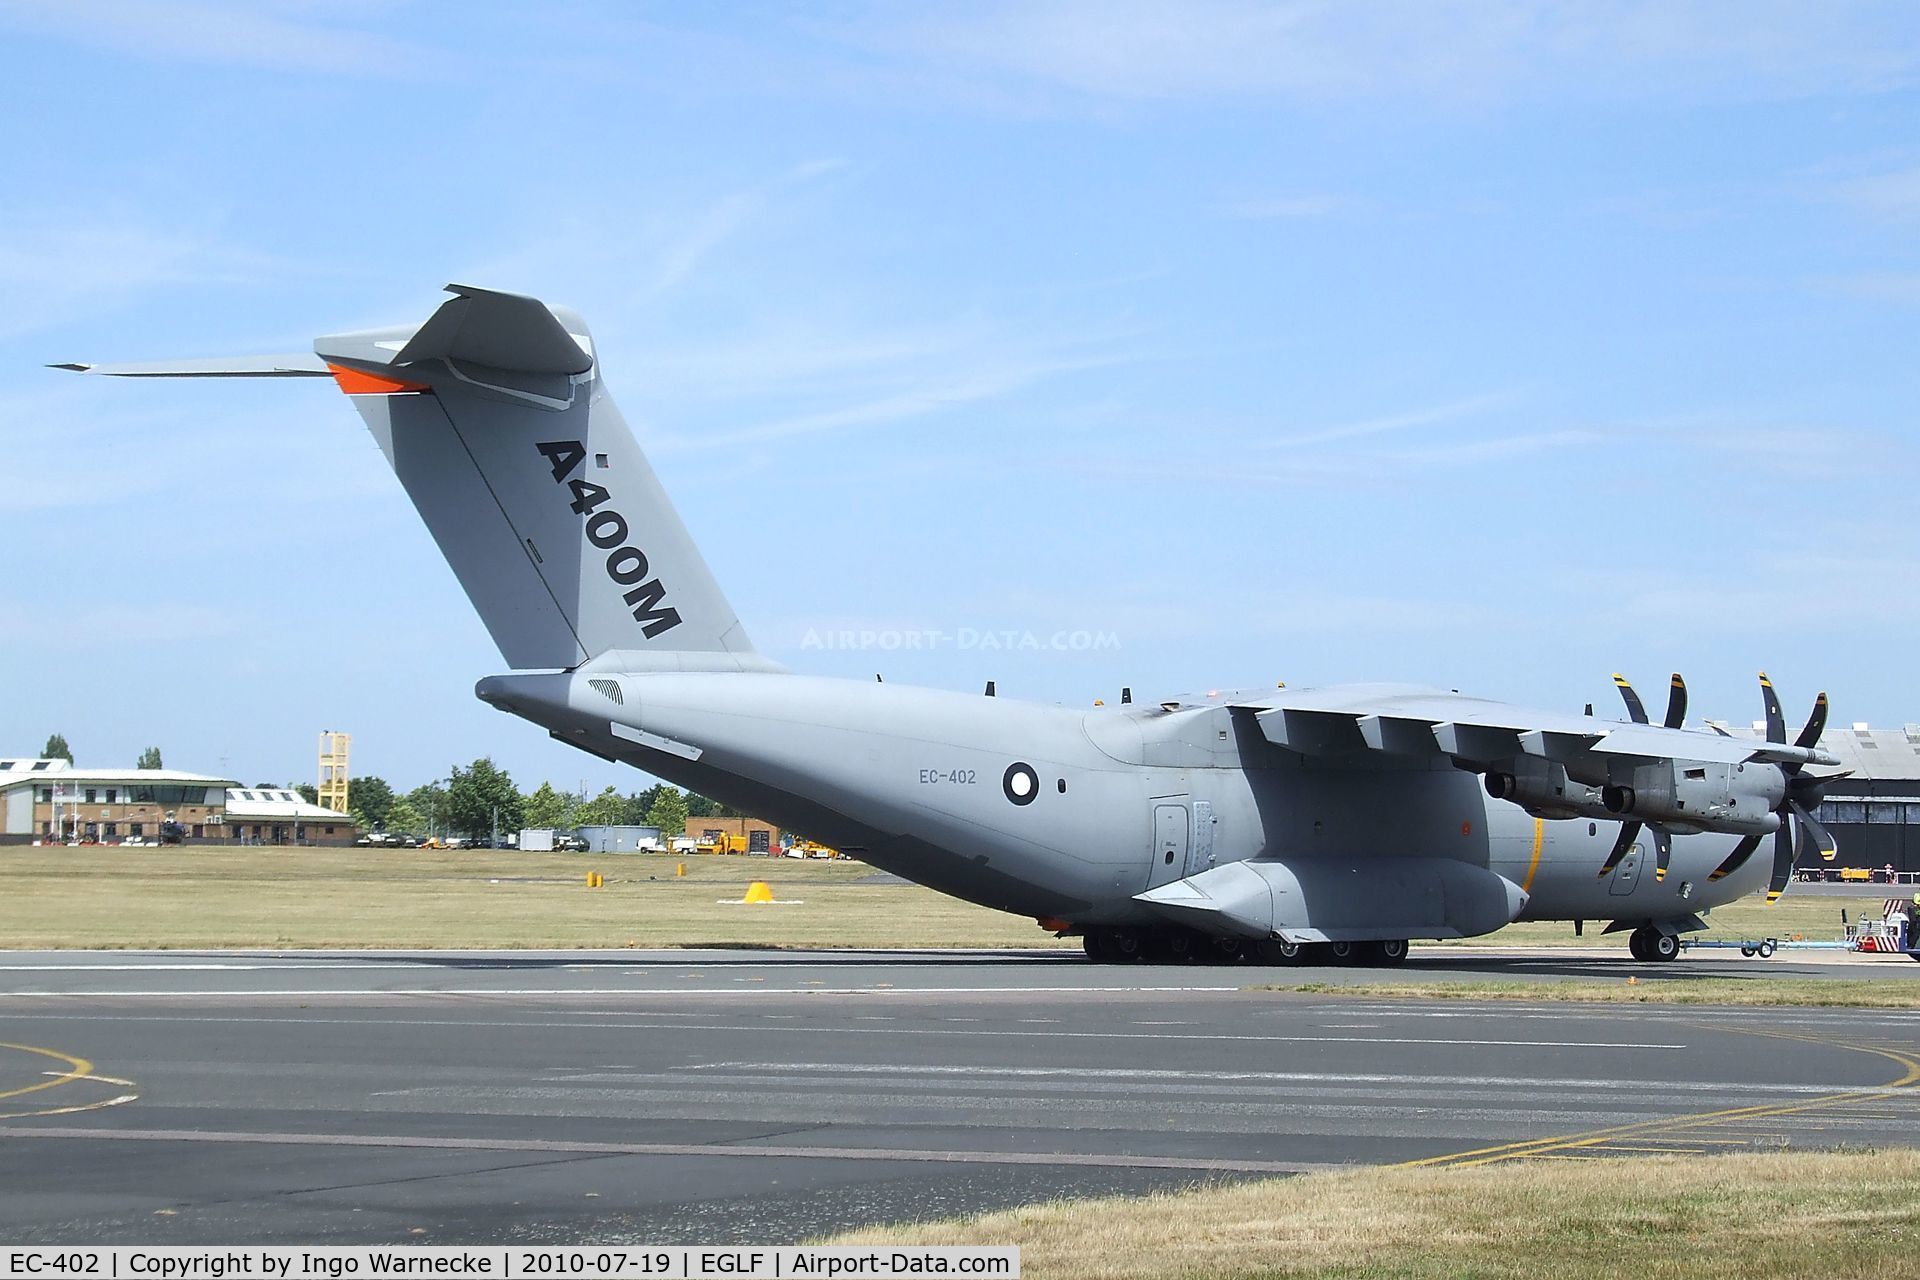 EC-402, 2010 Airbus A400M Atlas C/N 002, Airbus A400M second prototype being readied for the flying display at Farnborough International 2010